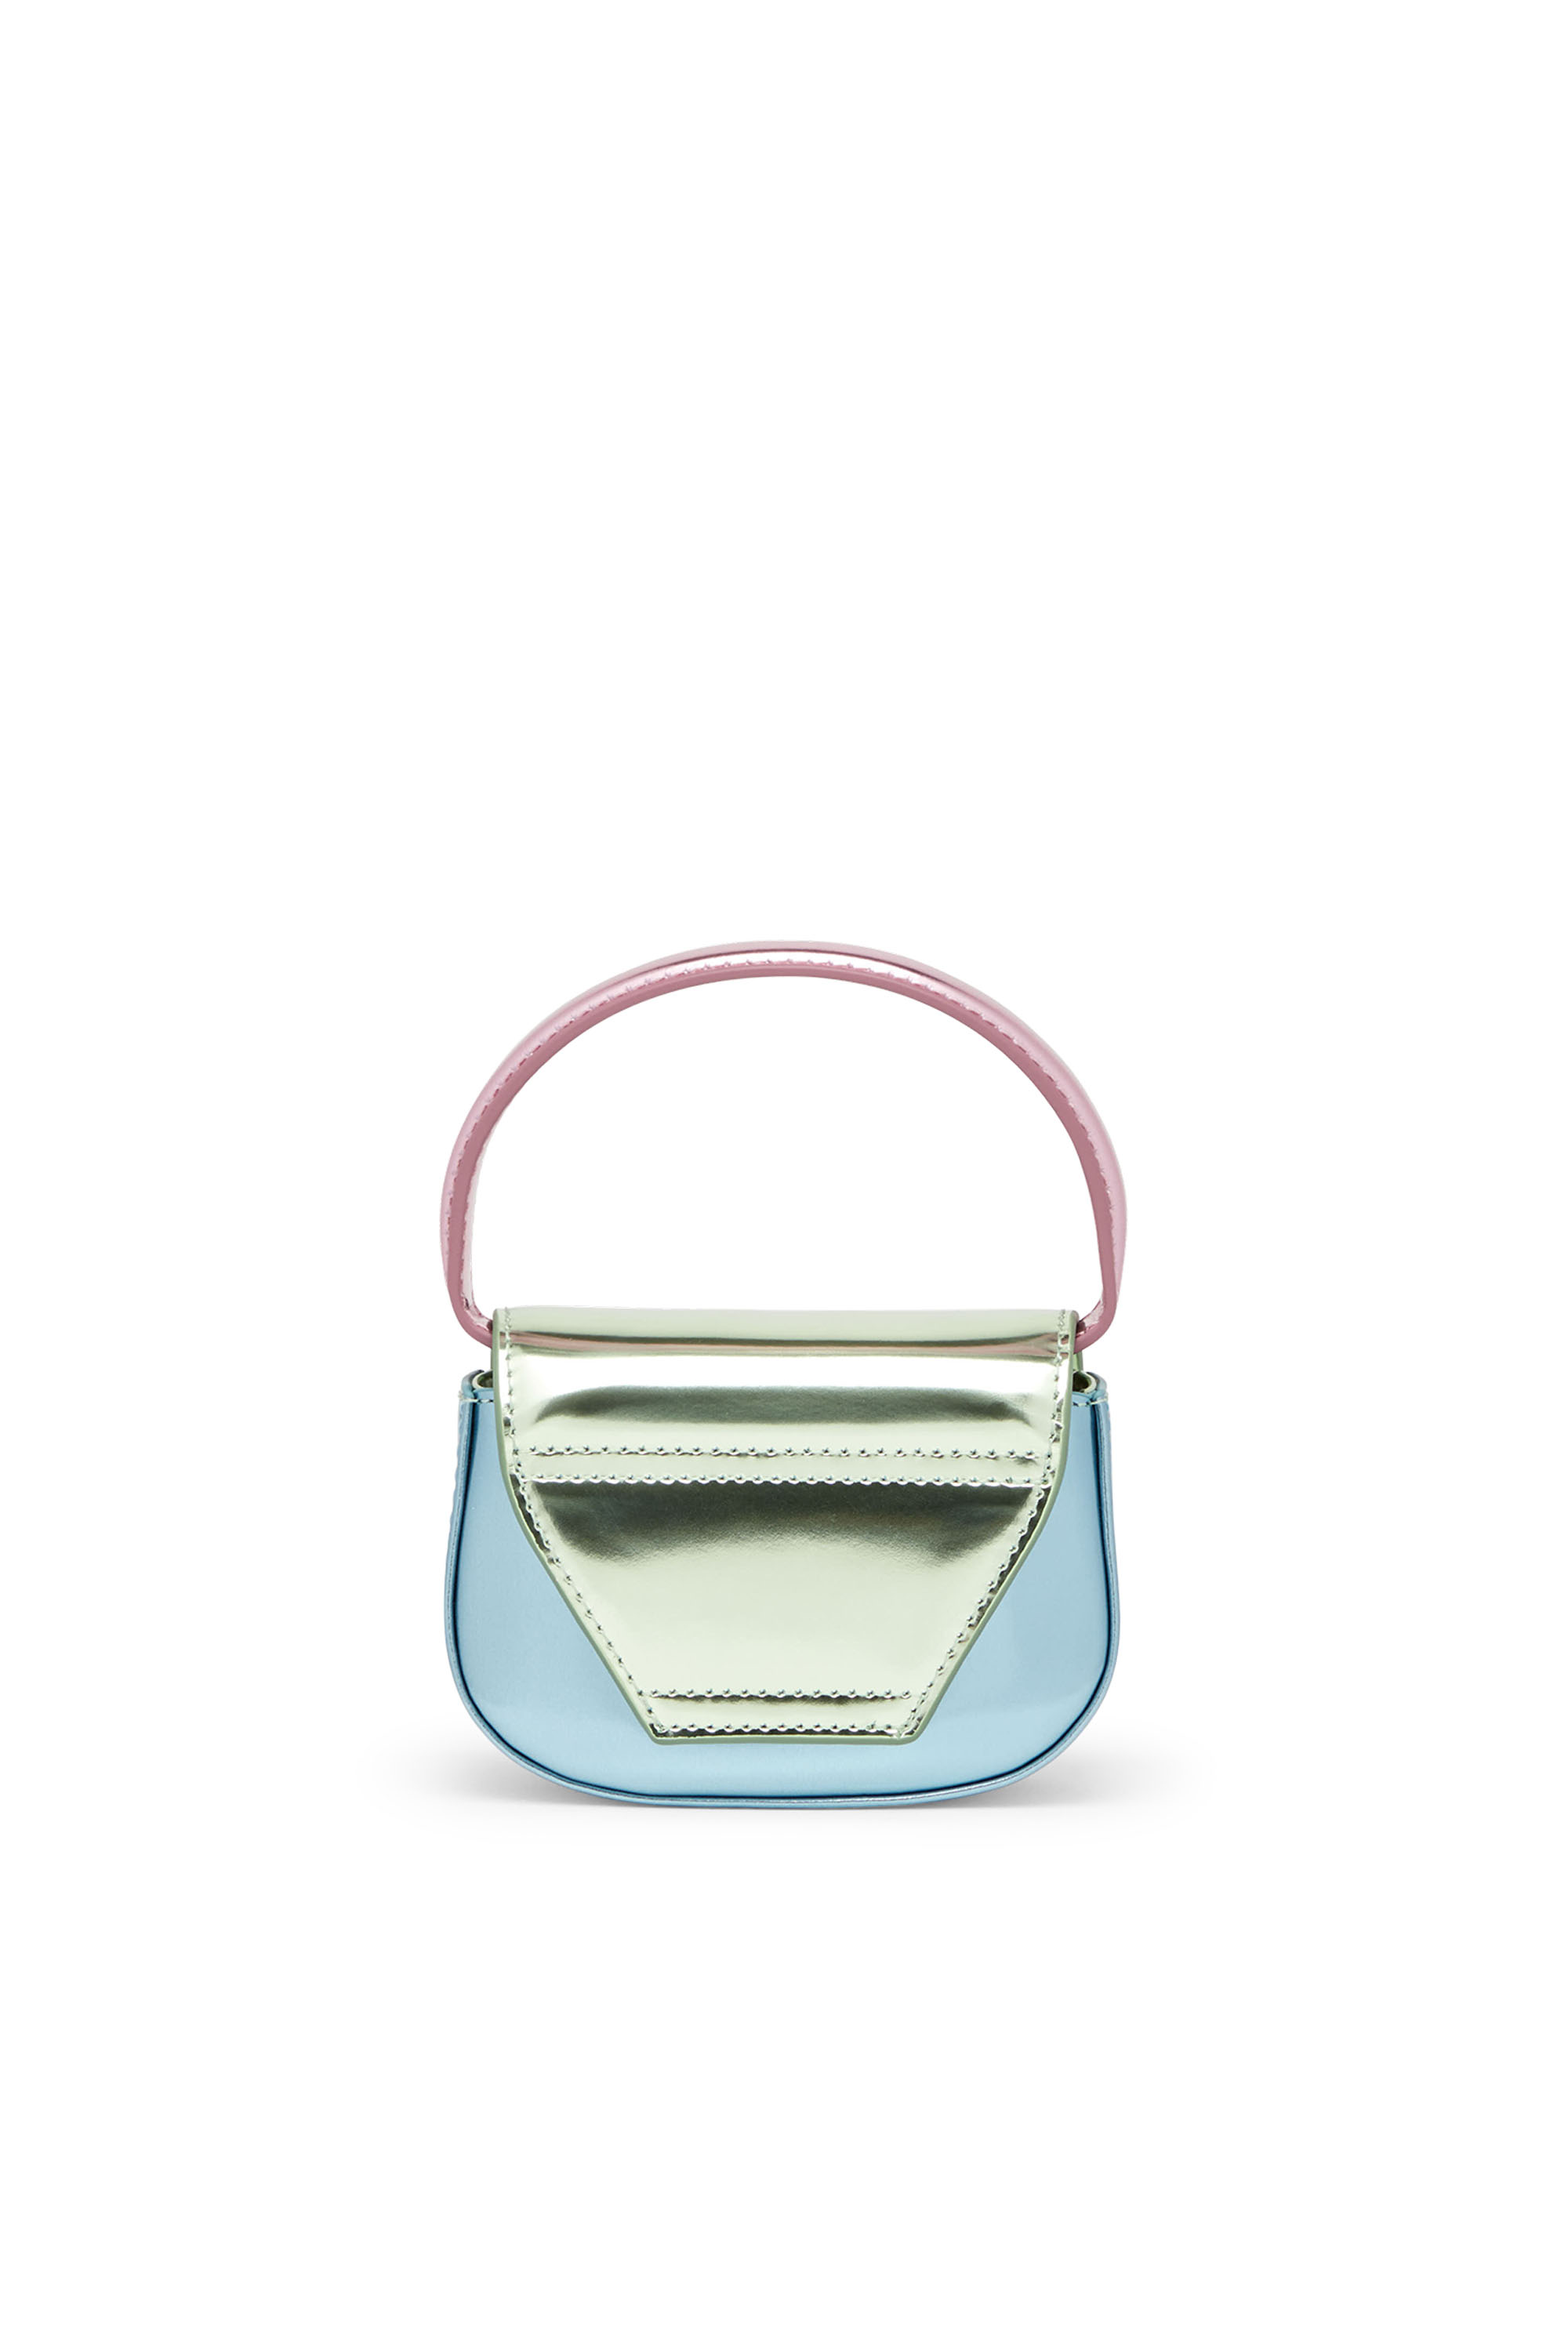 Diesel - 1DR XS, Female 1DR XS-Iconic mini bag in mirror leather in マルチカラー - Image 2